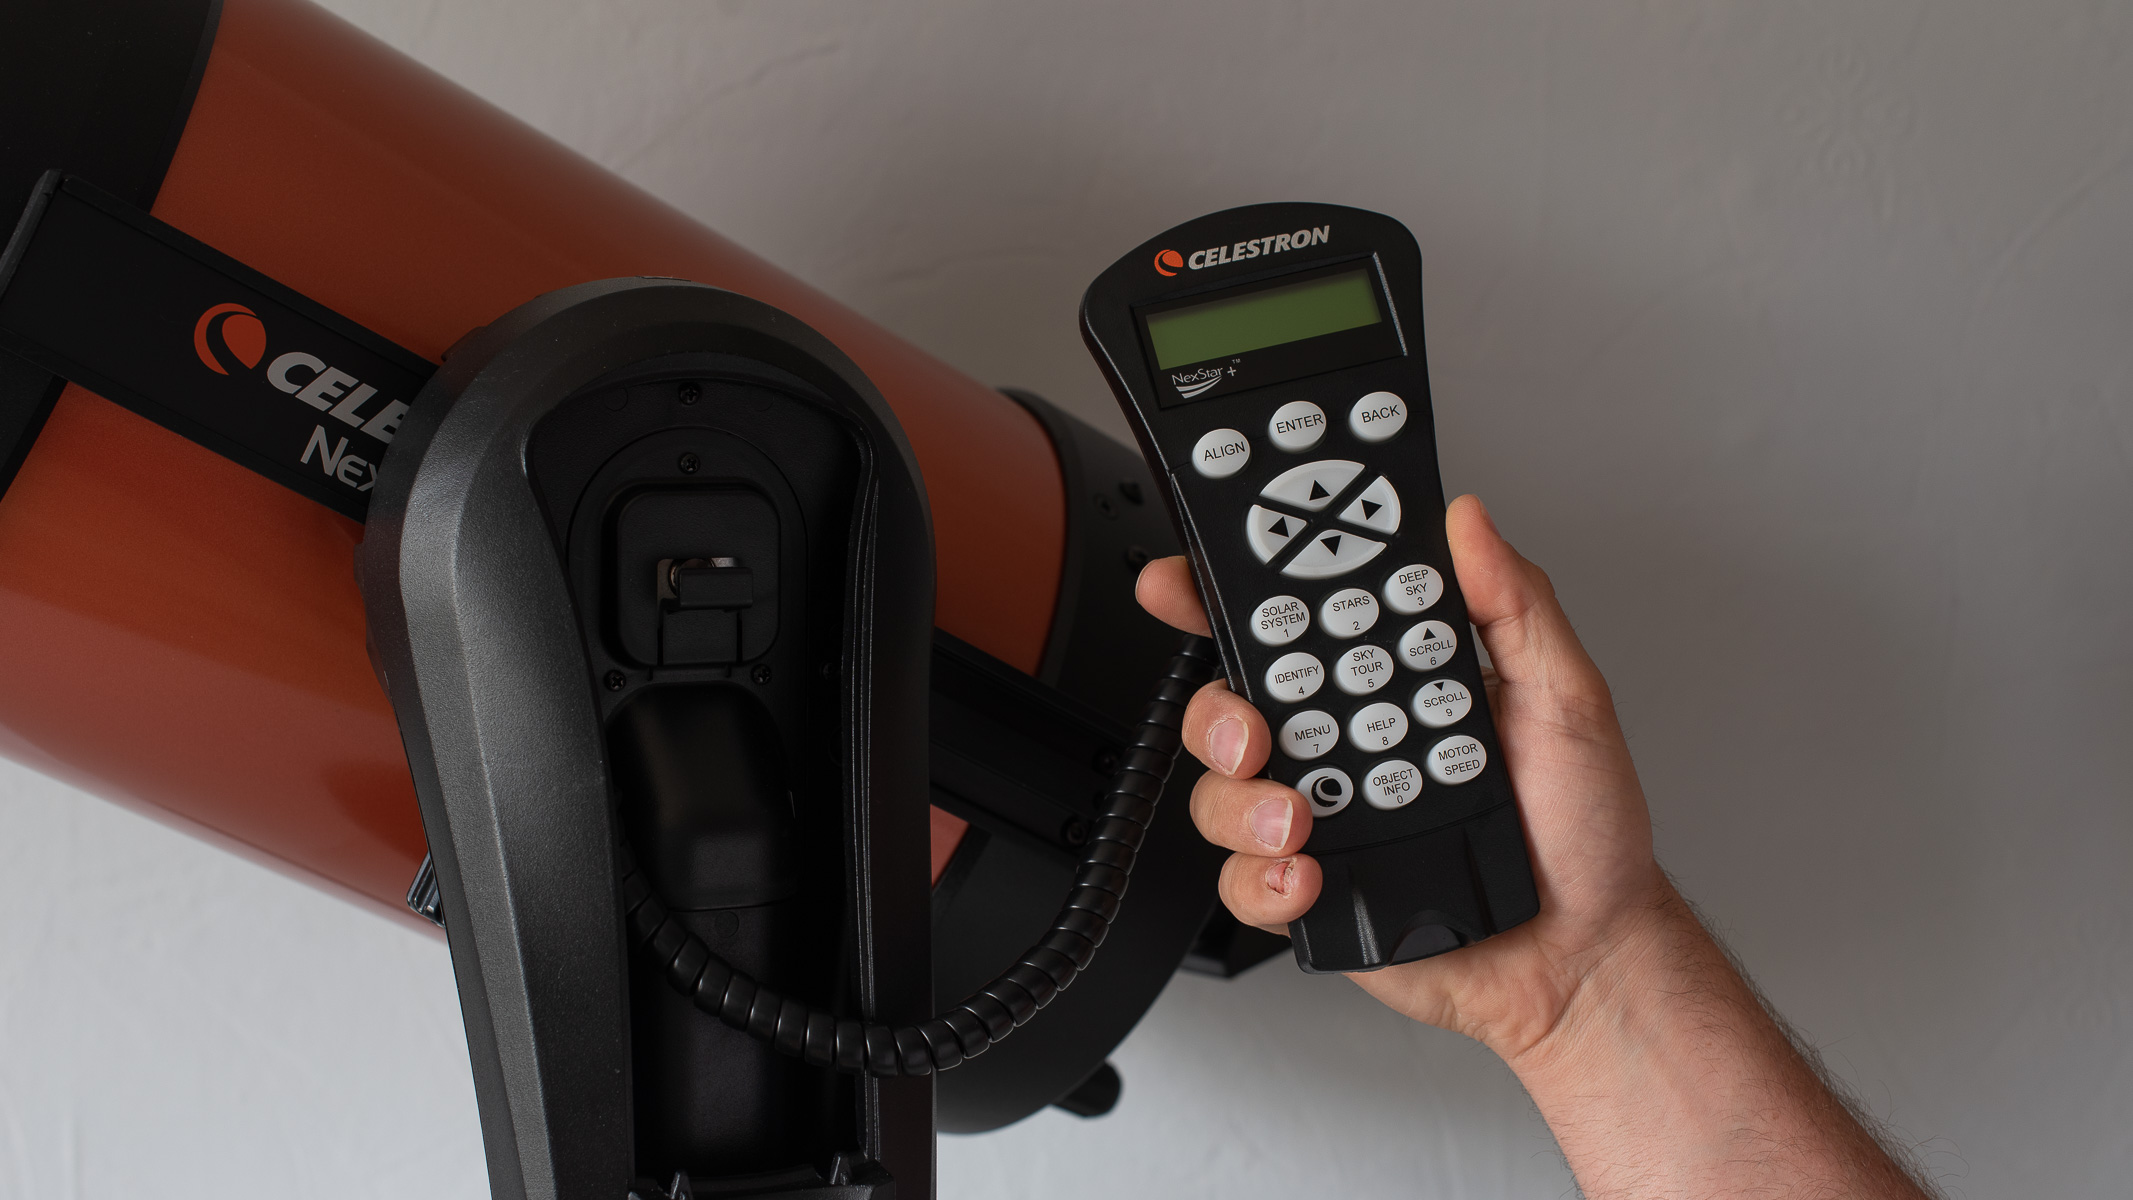 A clear view of the Celestron NexStar 8SE hand controller